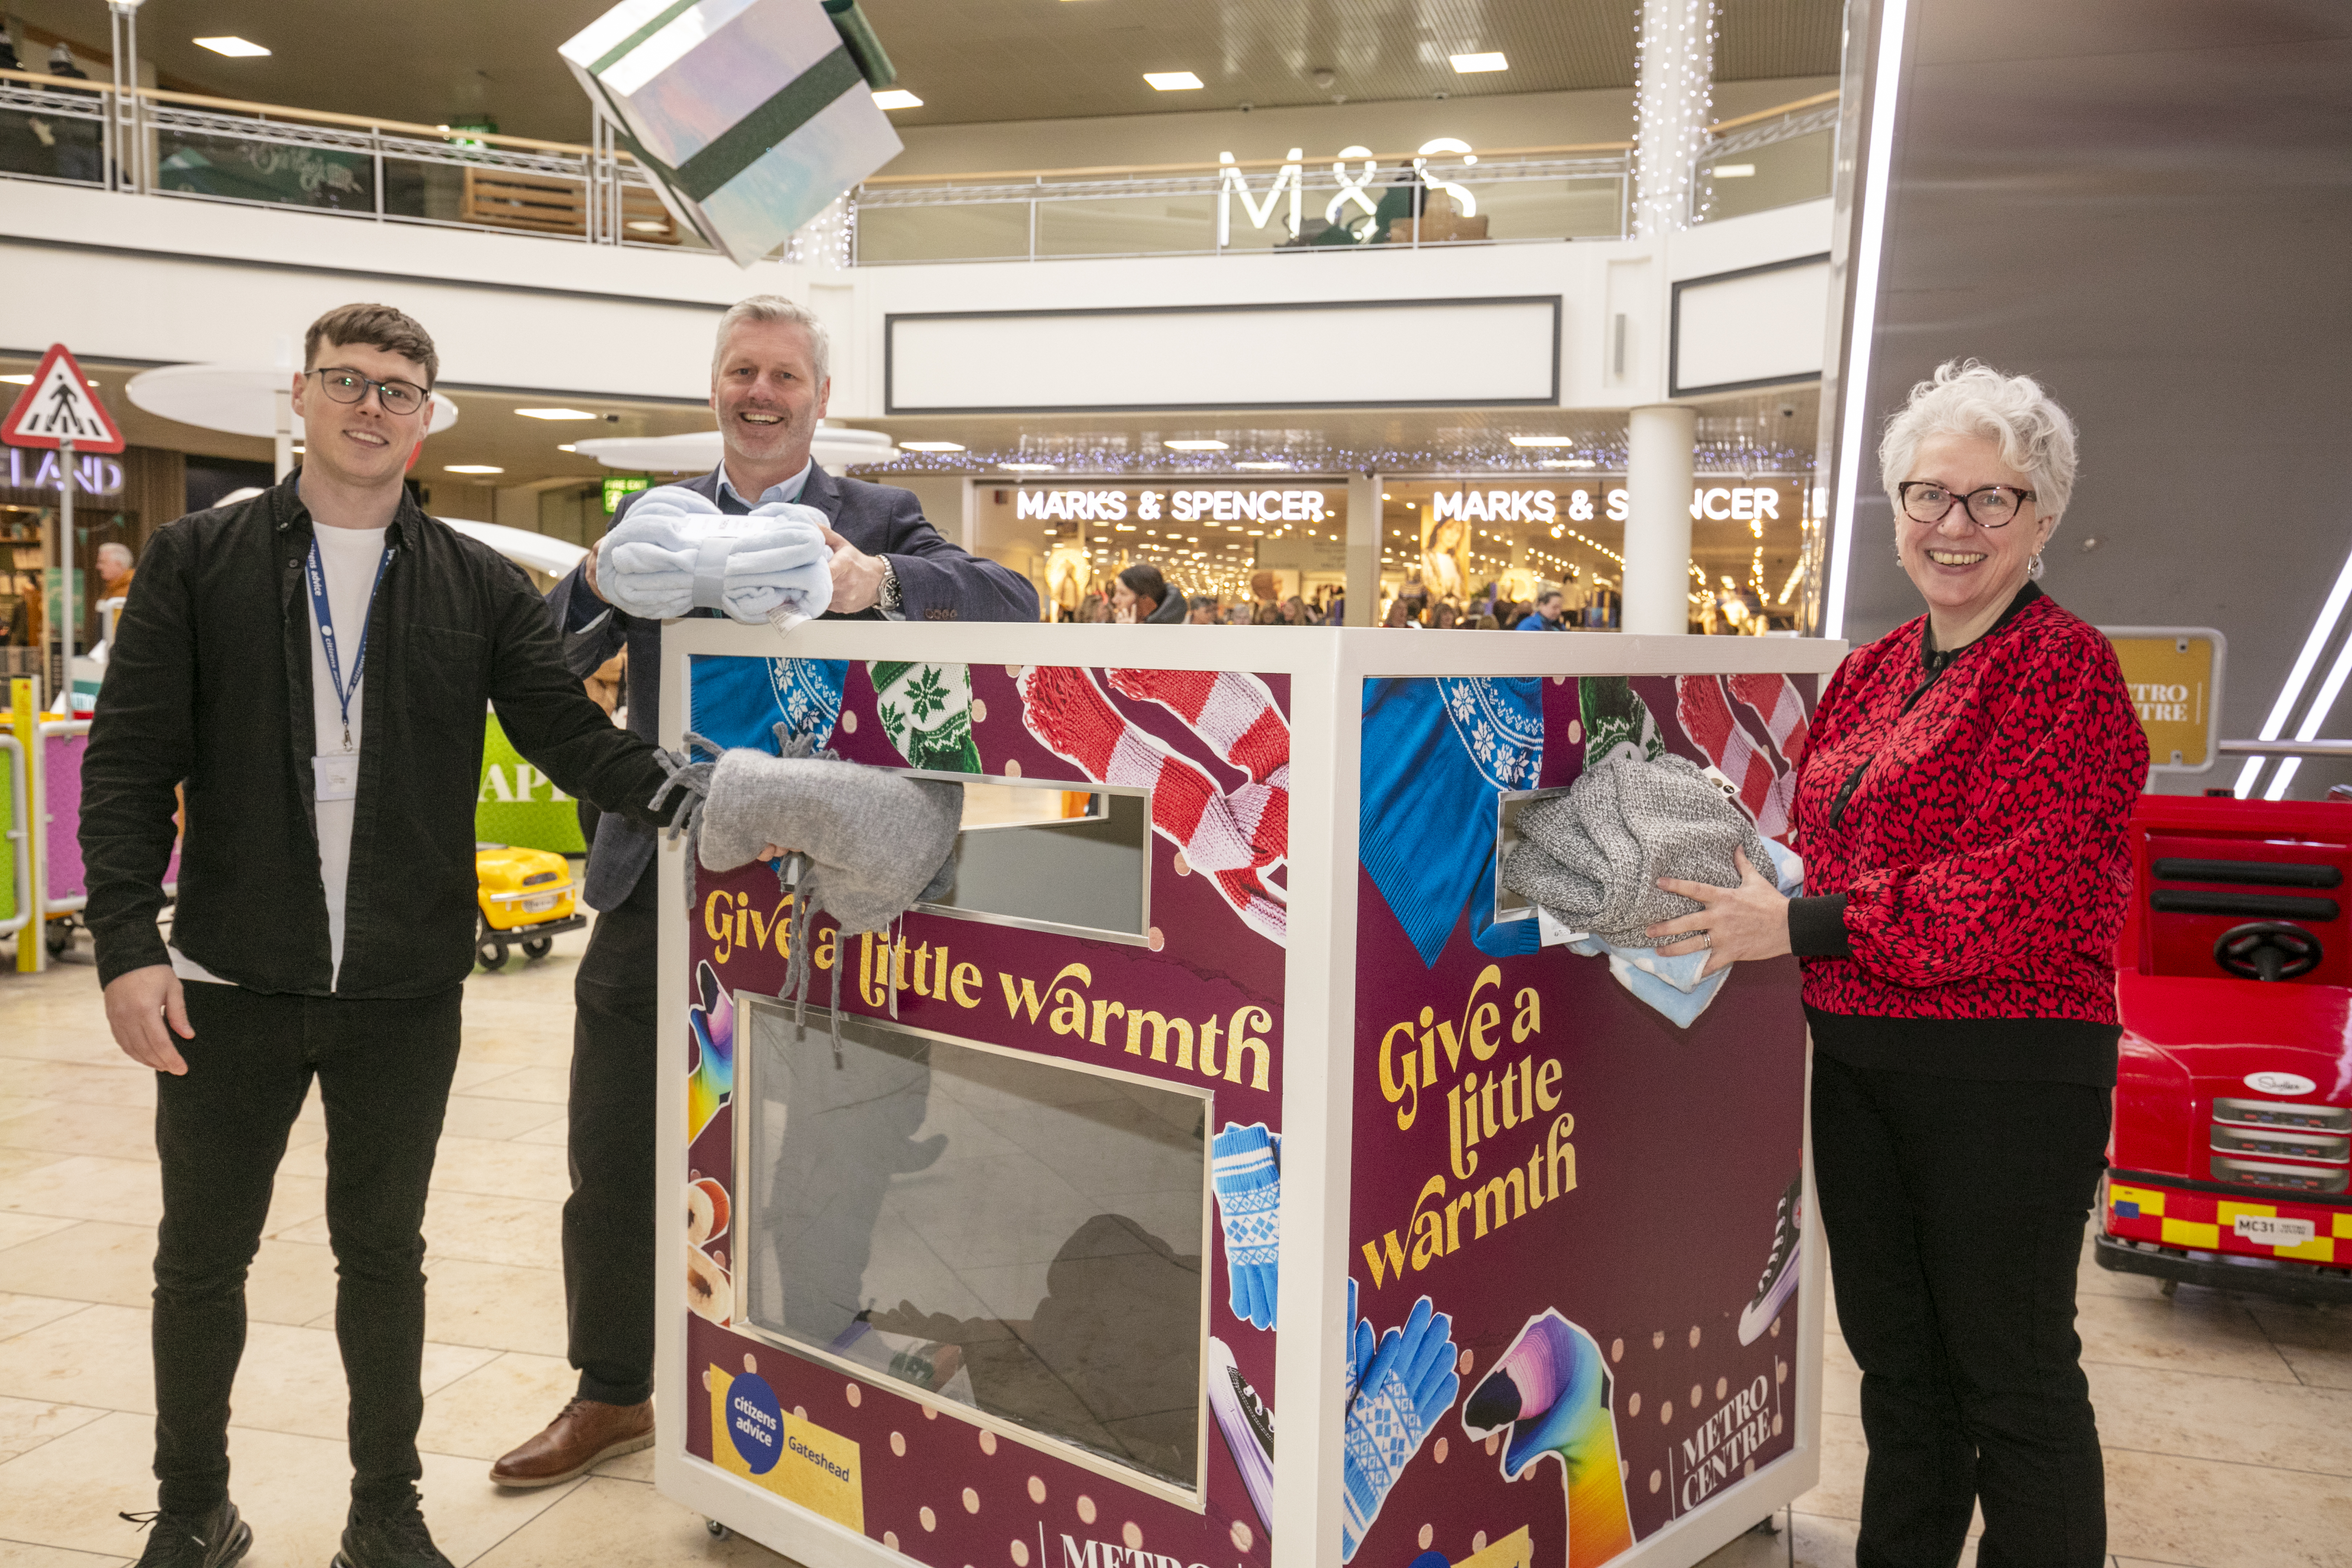 Michael, Gavin & Judith standing smiling at the camera as they donate to the Winter Warmer Appeal.